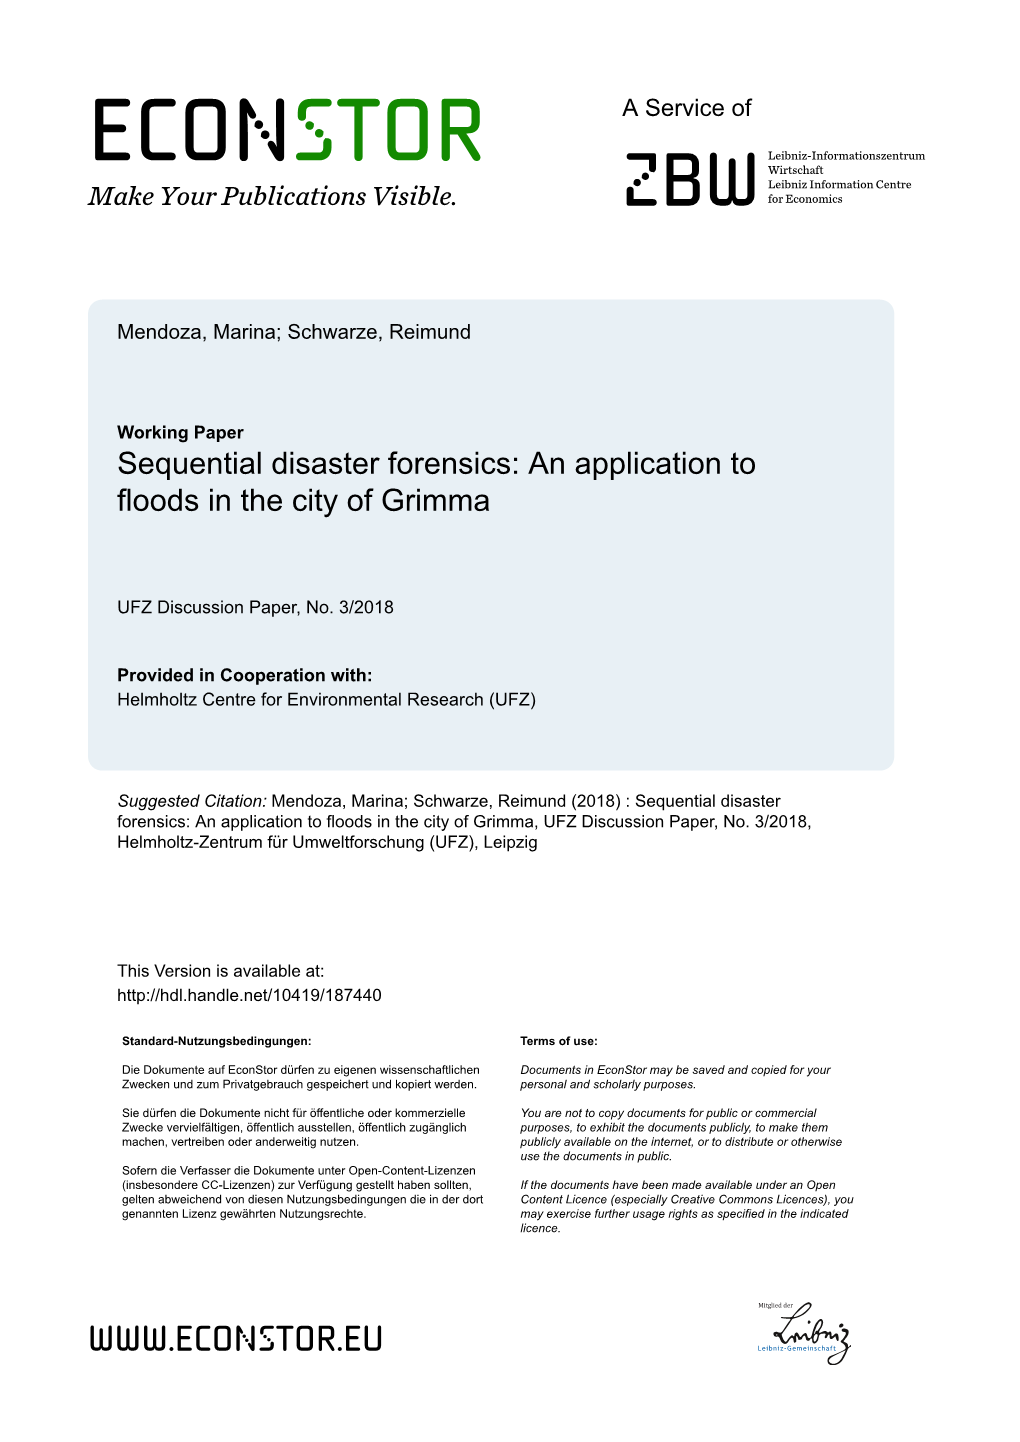 Sequential Disaster Forensics: an Application to Floods in the City of Grima